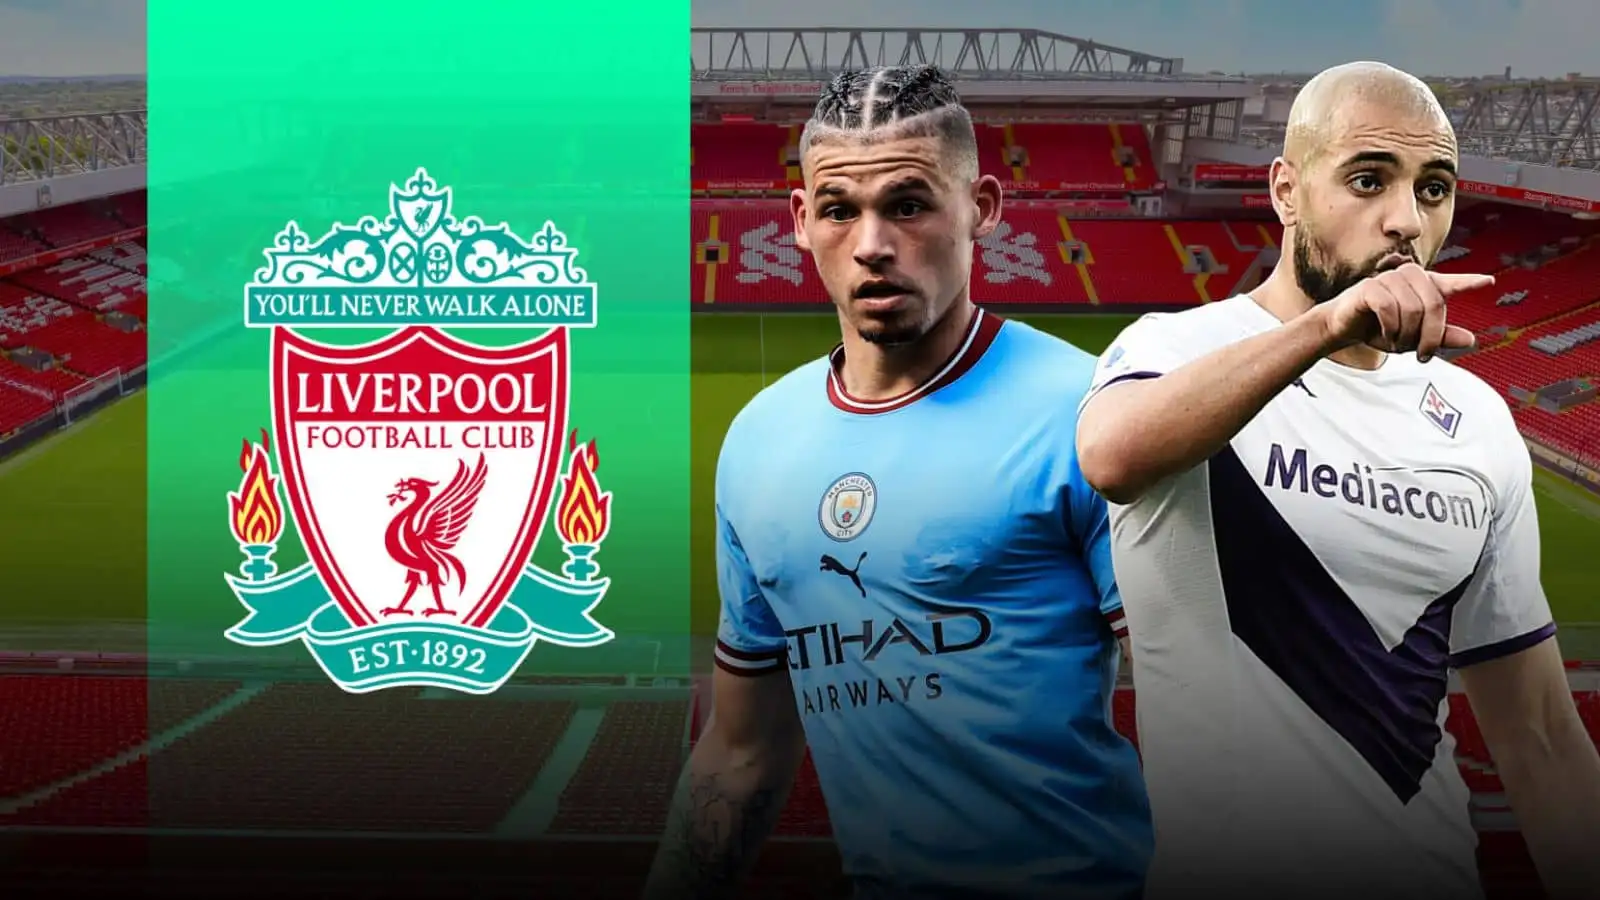 Kalvin Phillips of Manchester City and Firoentina's Sofyan Amrabat are Liverpool targets